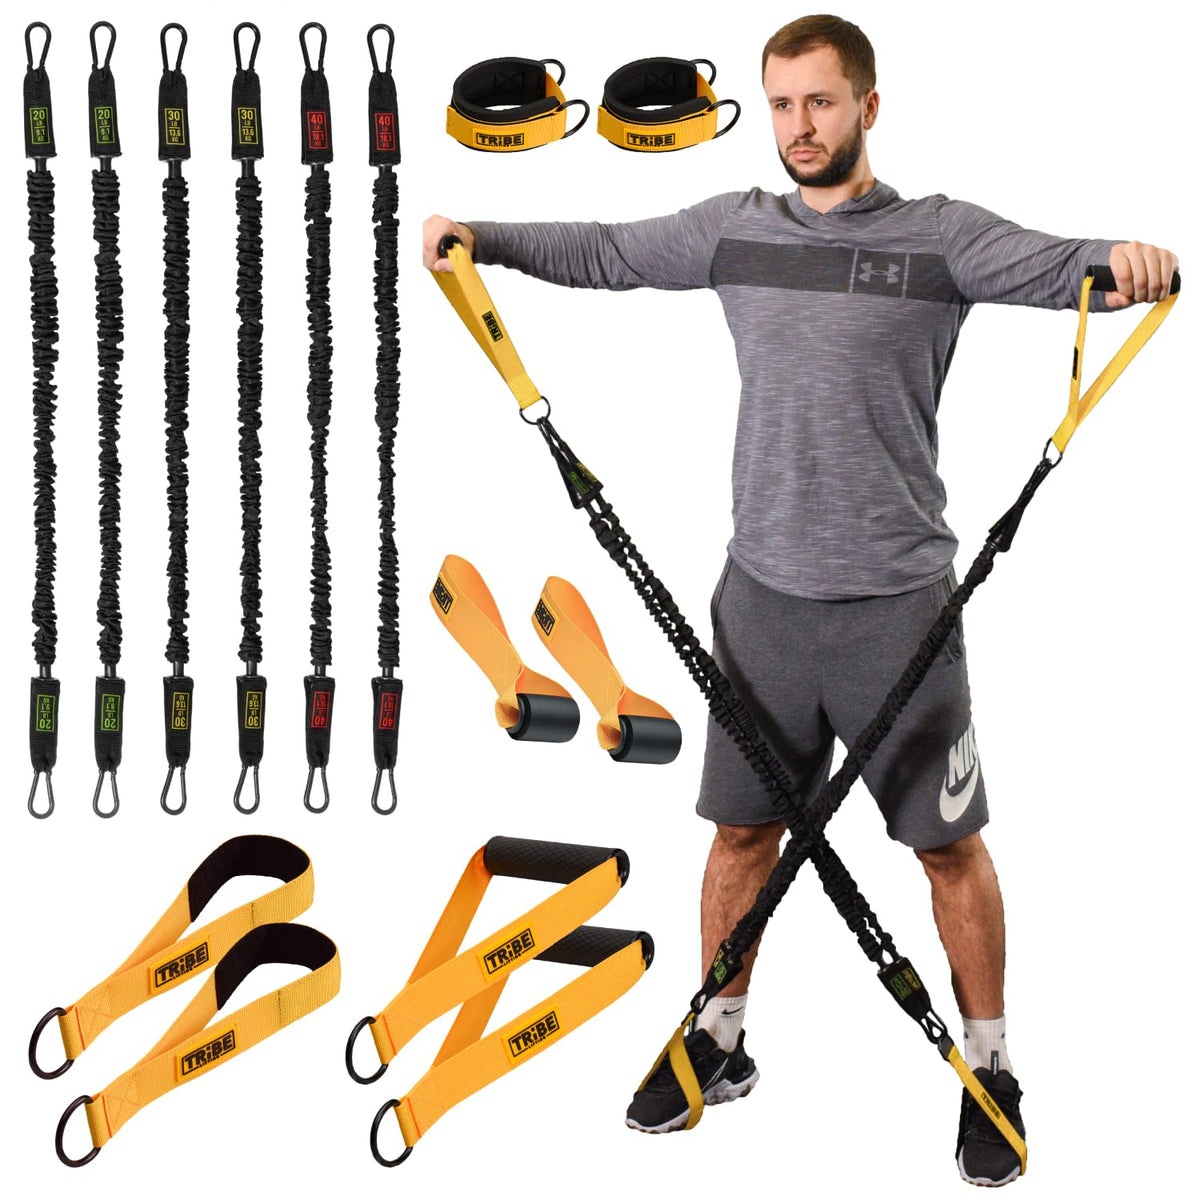 Tube Resistance Bands for Working Out Men and Women - Exercise Bands Resistance Bands Set, Handles, Ankle Straps, Foot Straps and Door Anchor, Tube Workout Bands (Yellow)